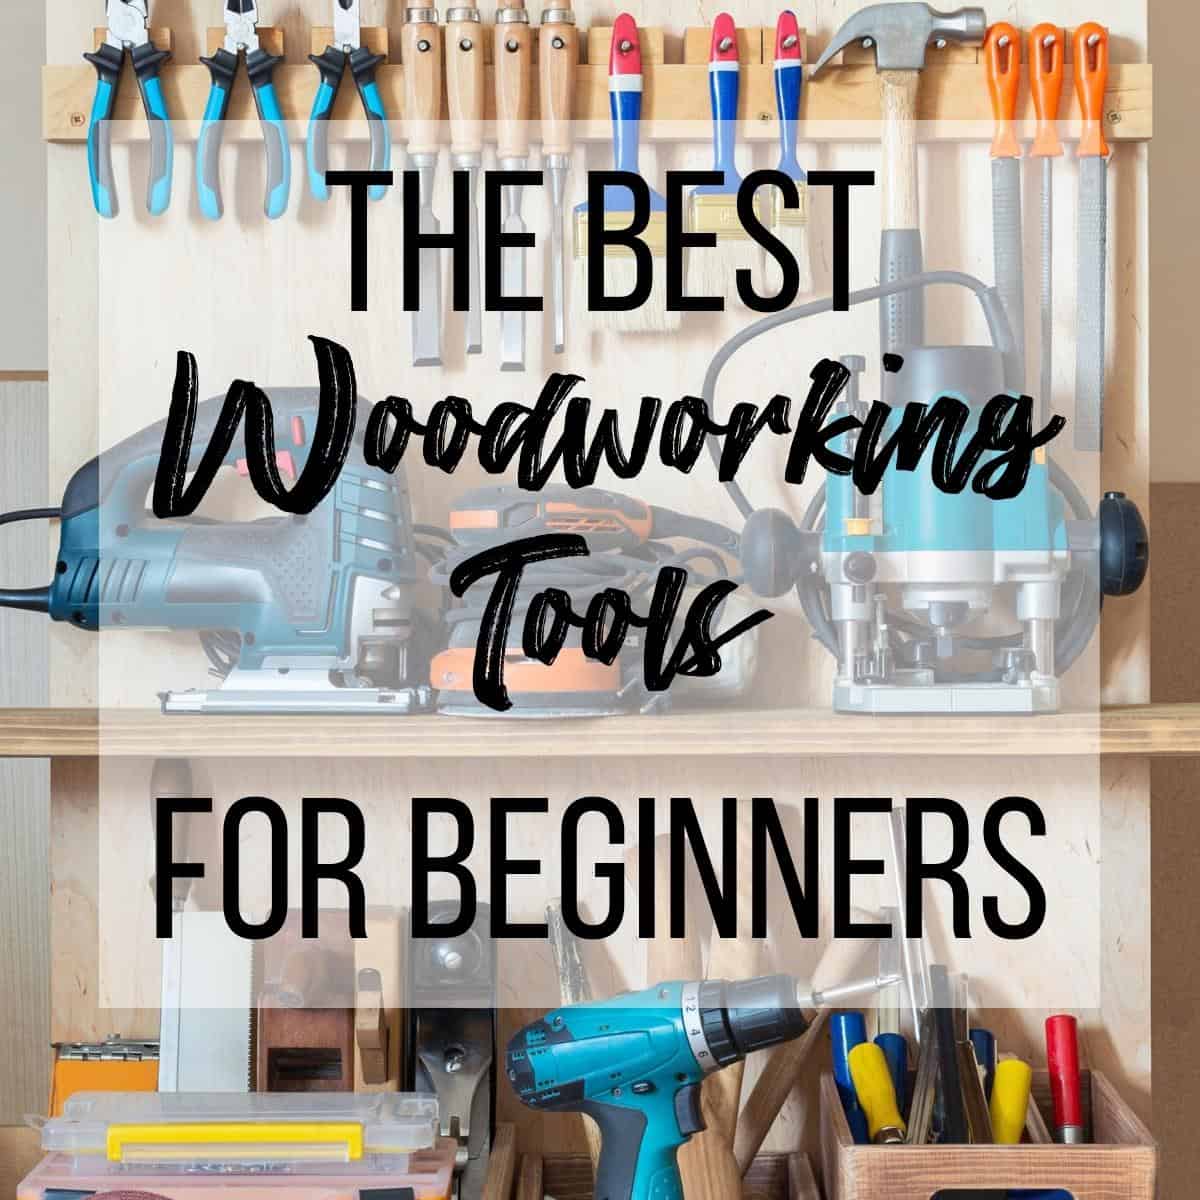 Woodworking Tools for Beginners (8 Tools You MUST Have)